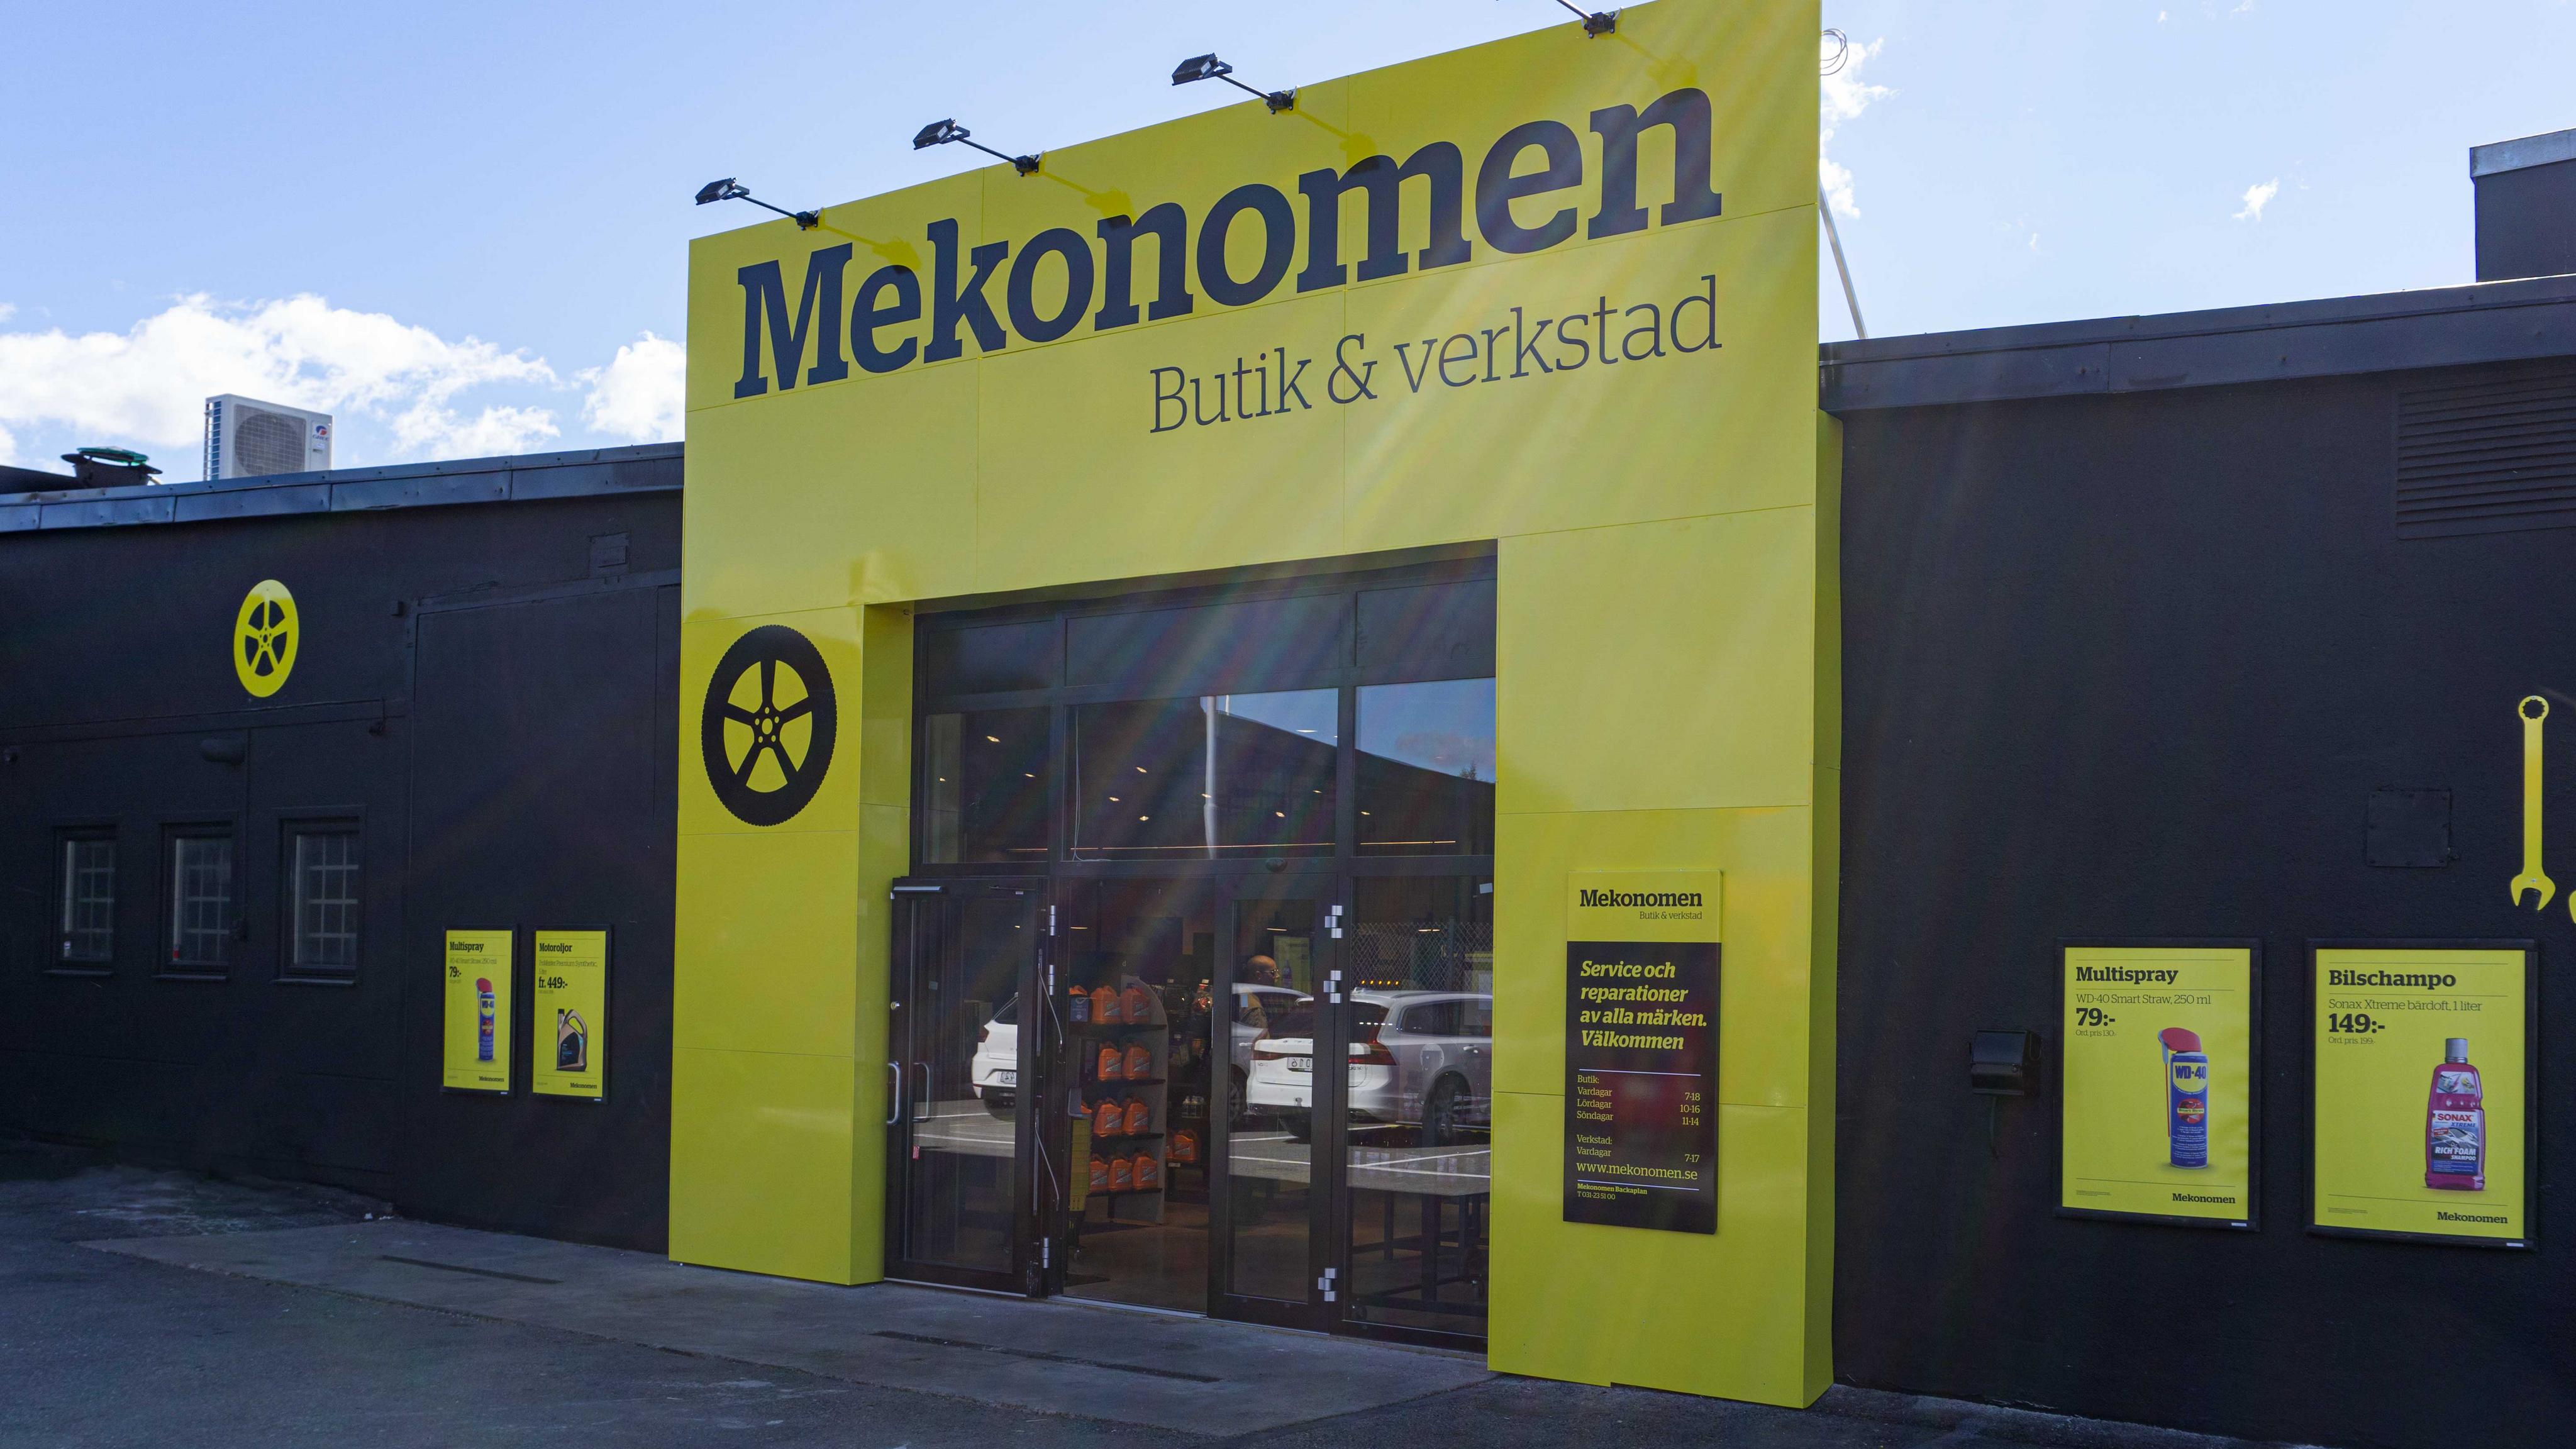 Mekonomen introduces click & collect as a shopping feature